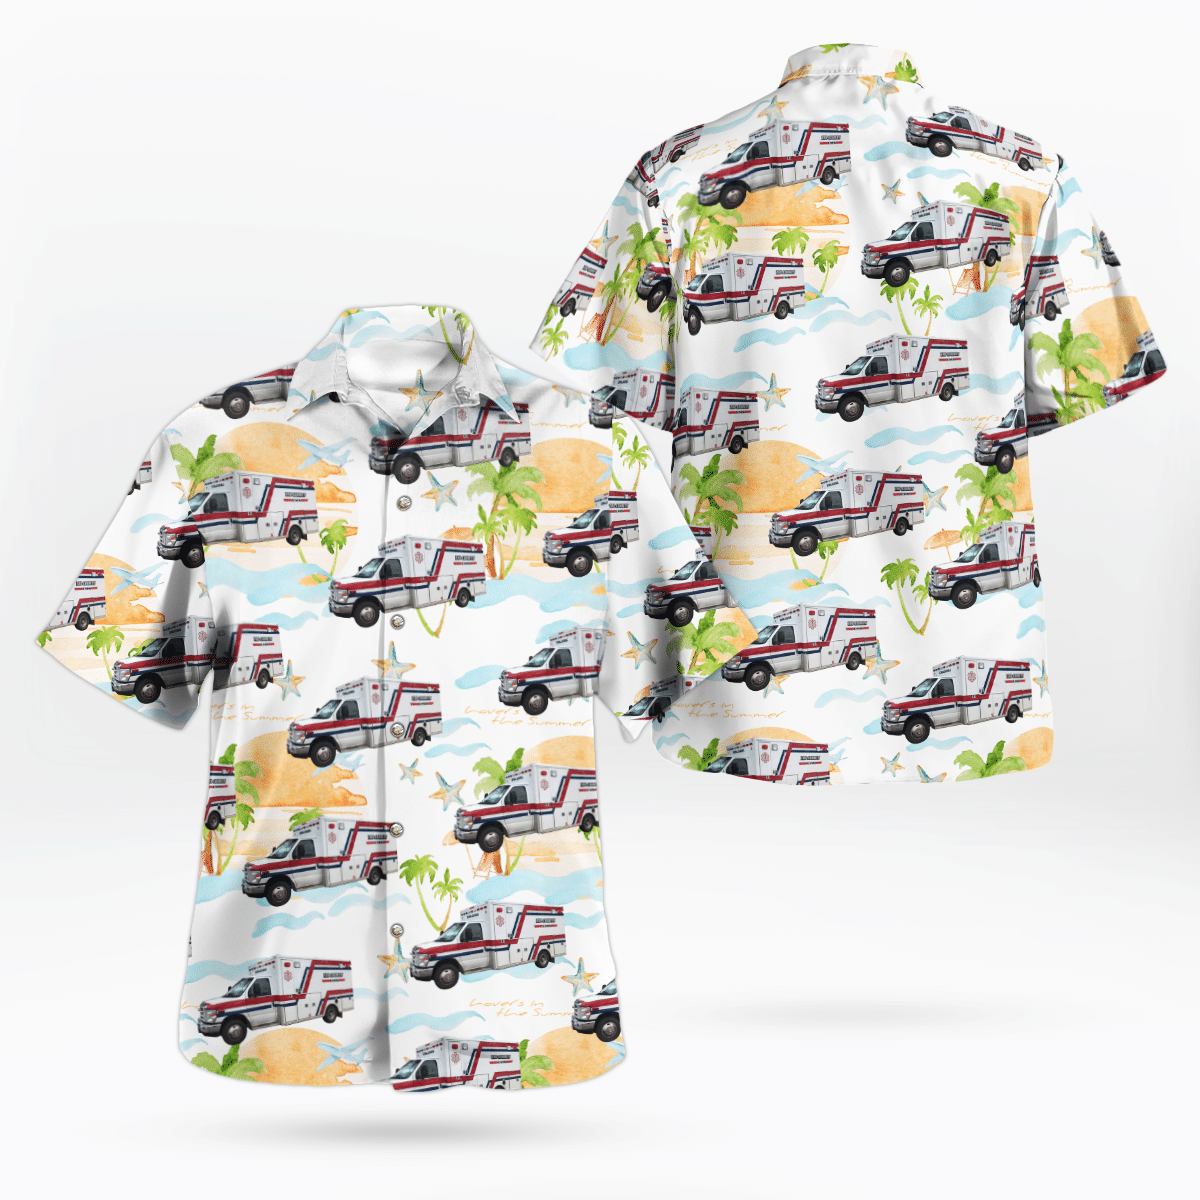 If you are in need of a new summertime look, pick up this Hawaiian shirt 192